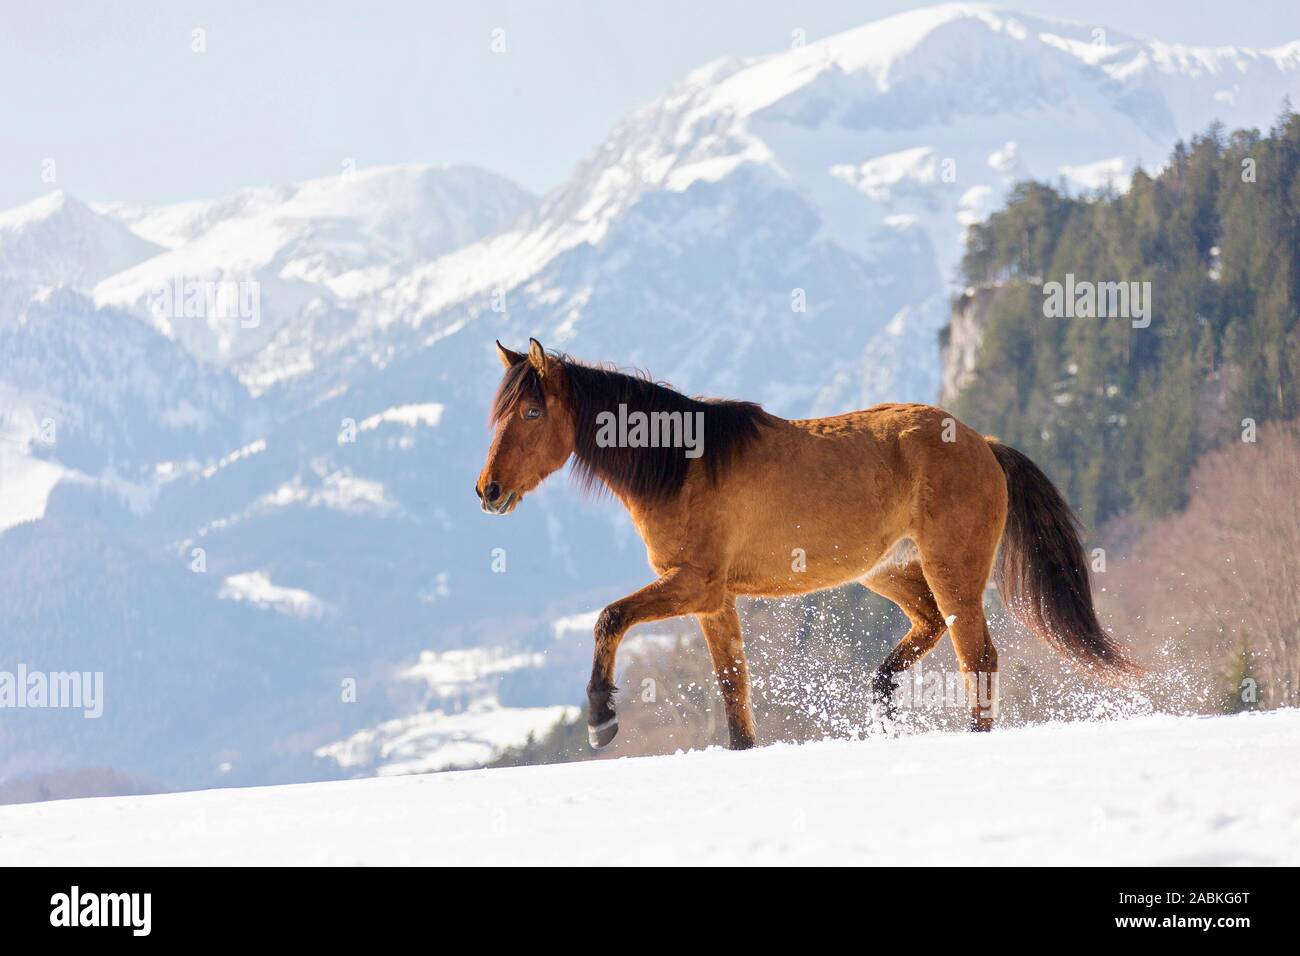 Mustang. Bay juvenile walking in snow with snowy mountains in background. Bavaria, Germany Stock Photo